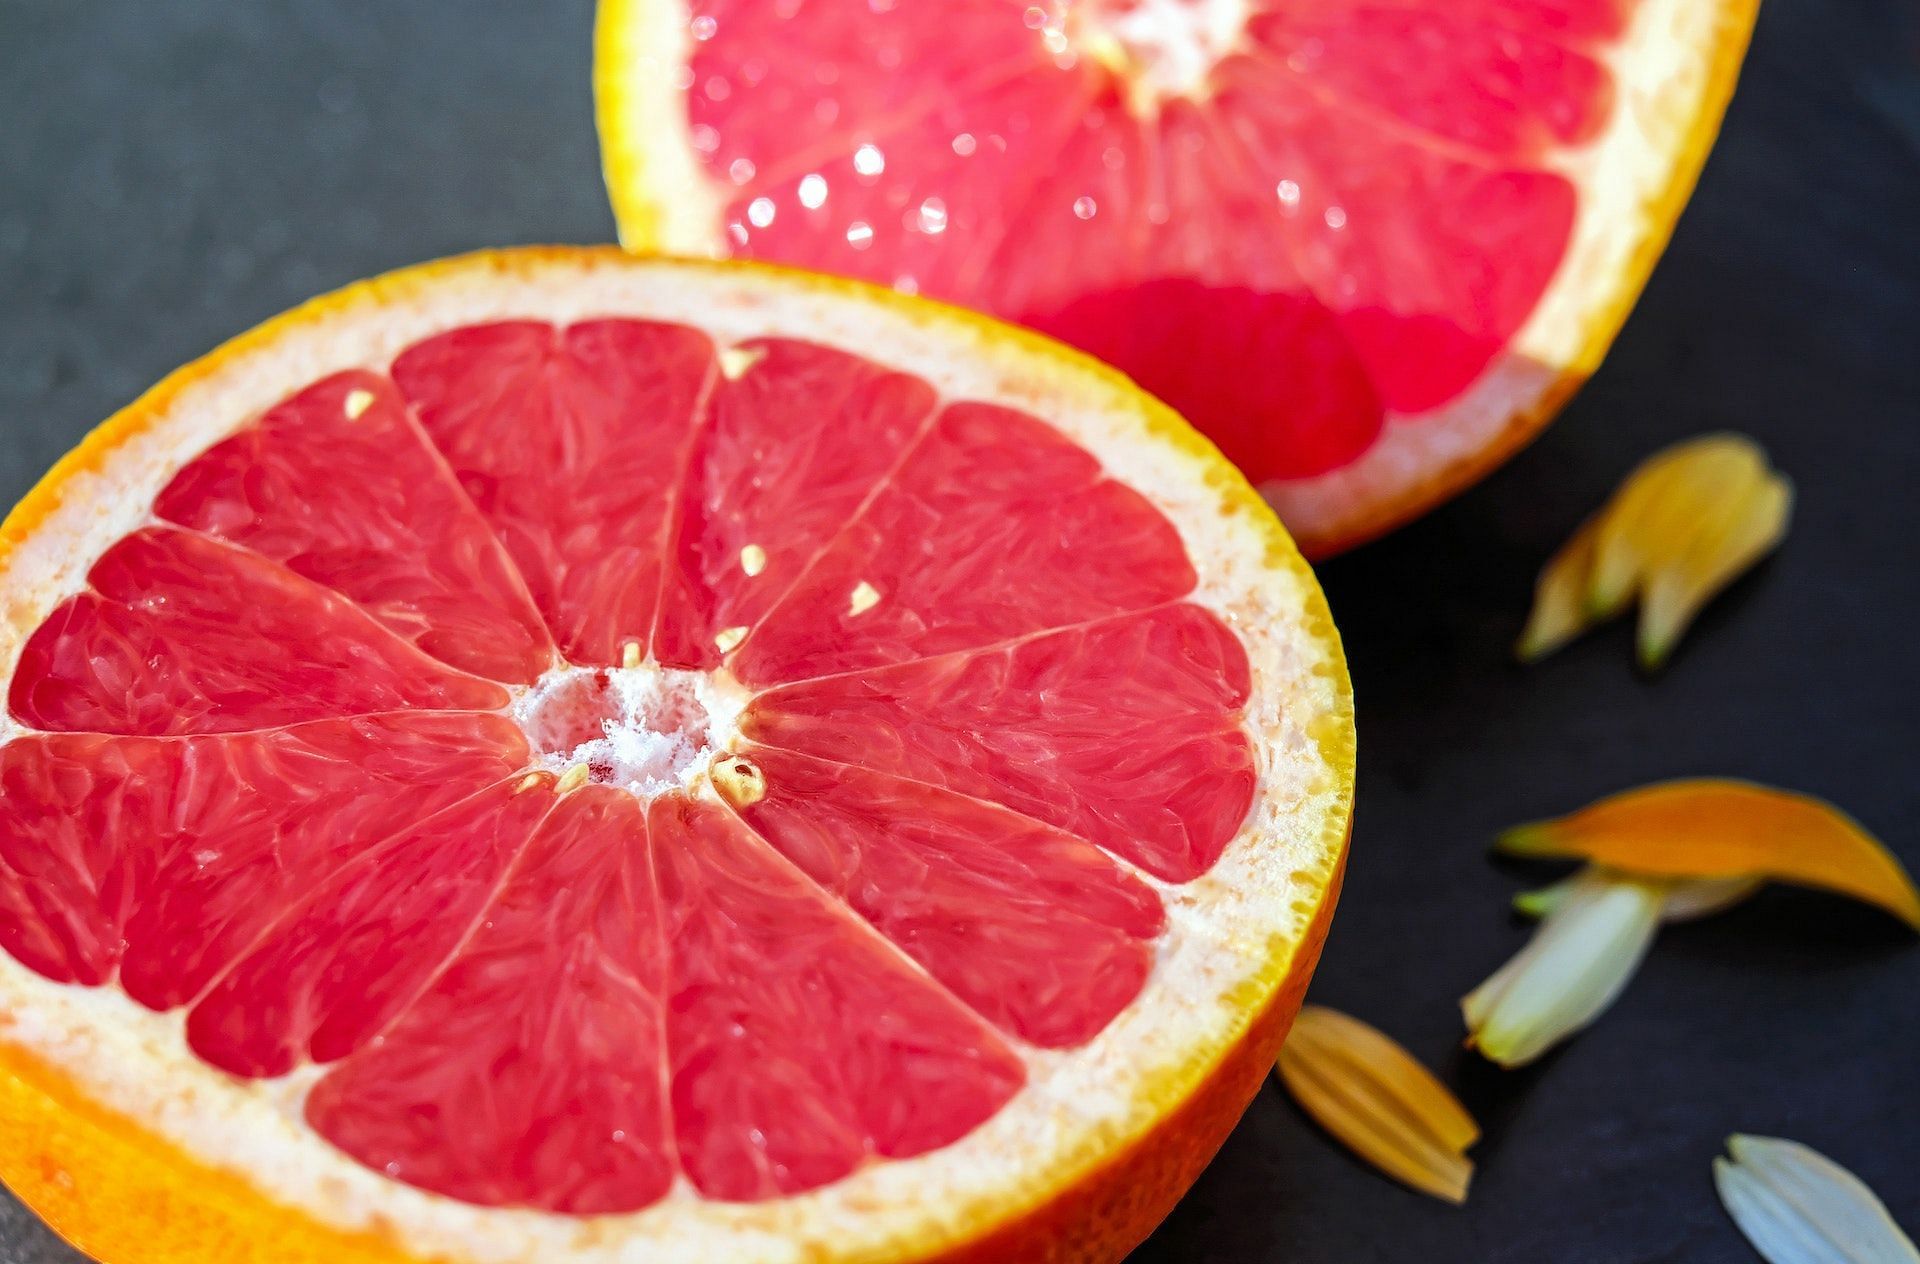 Grapefruits are rich in several important nutrients. (Photo via Pexels/Pixabay)